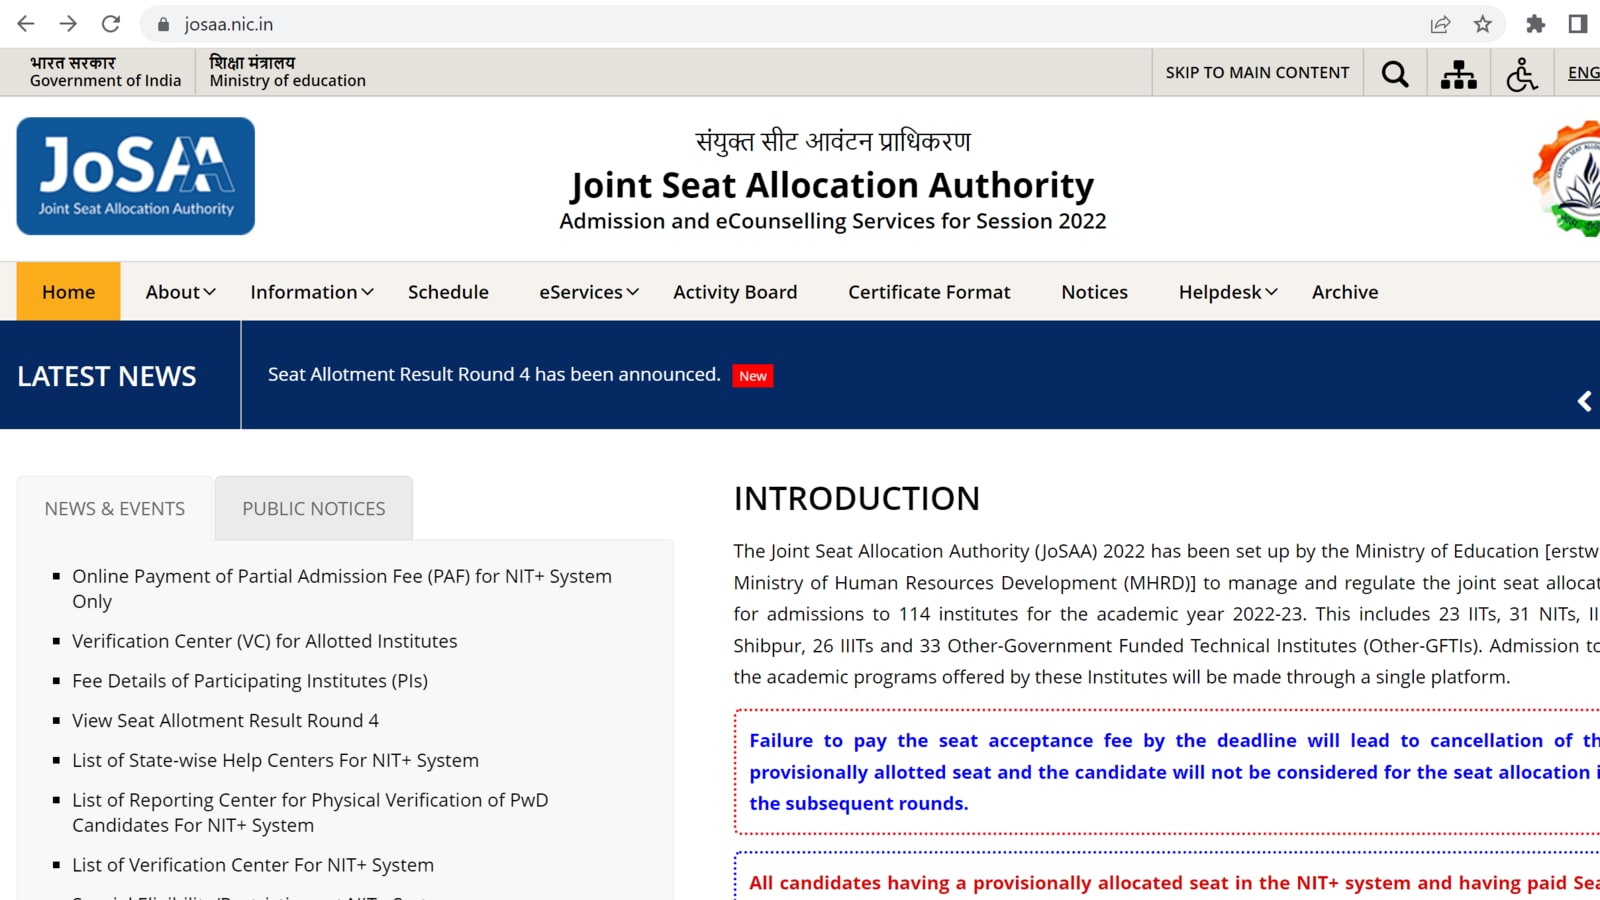 JOSAA round 4 seat allotment result out at josaa.nic.in, direct link